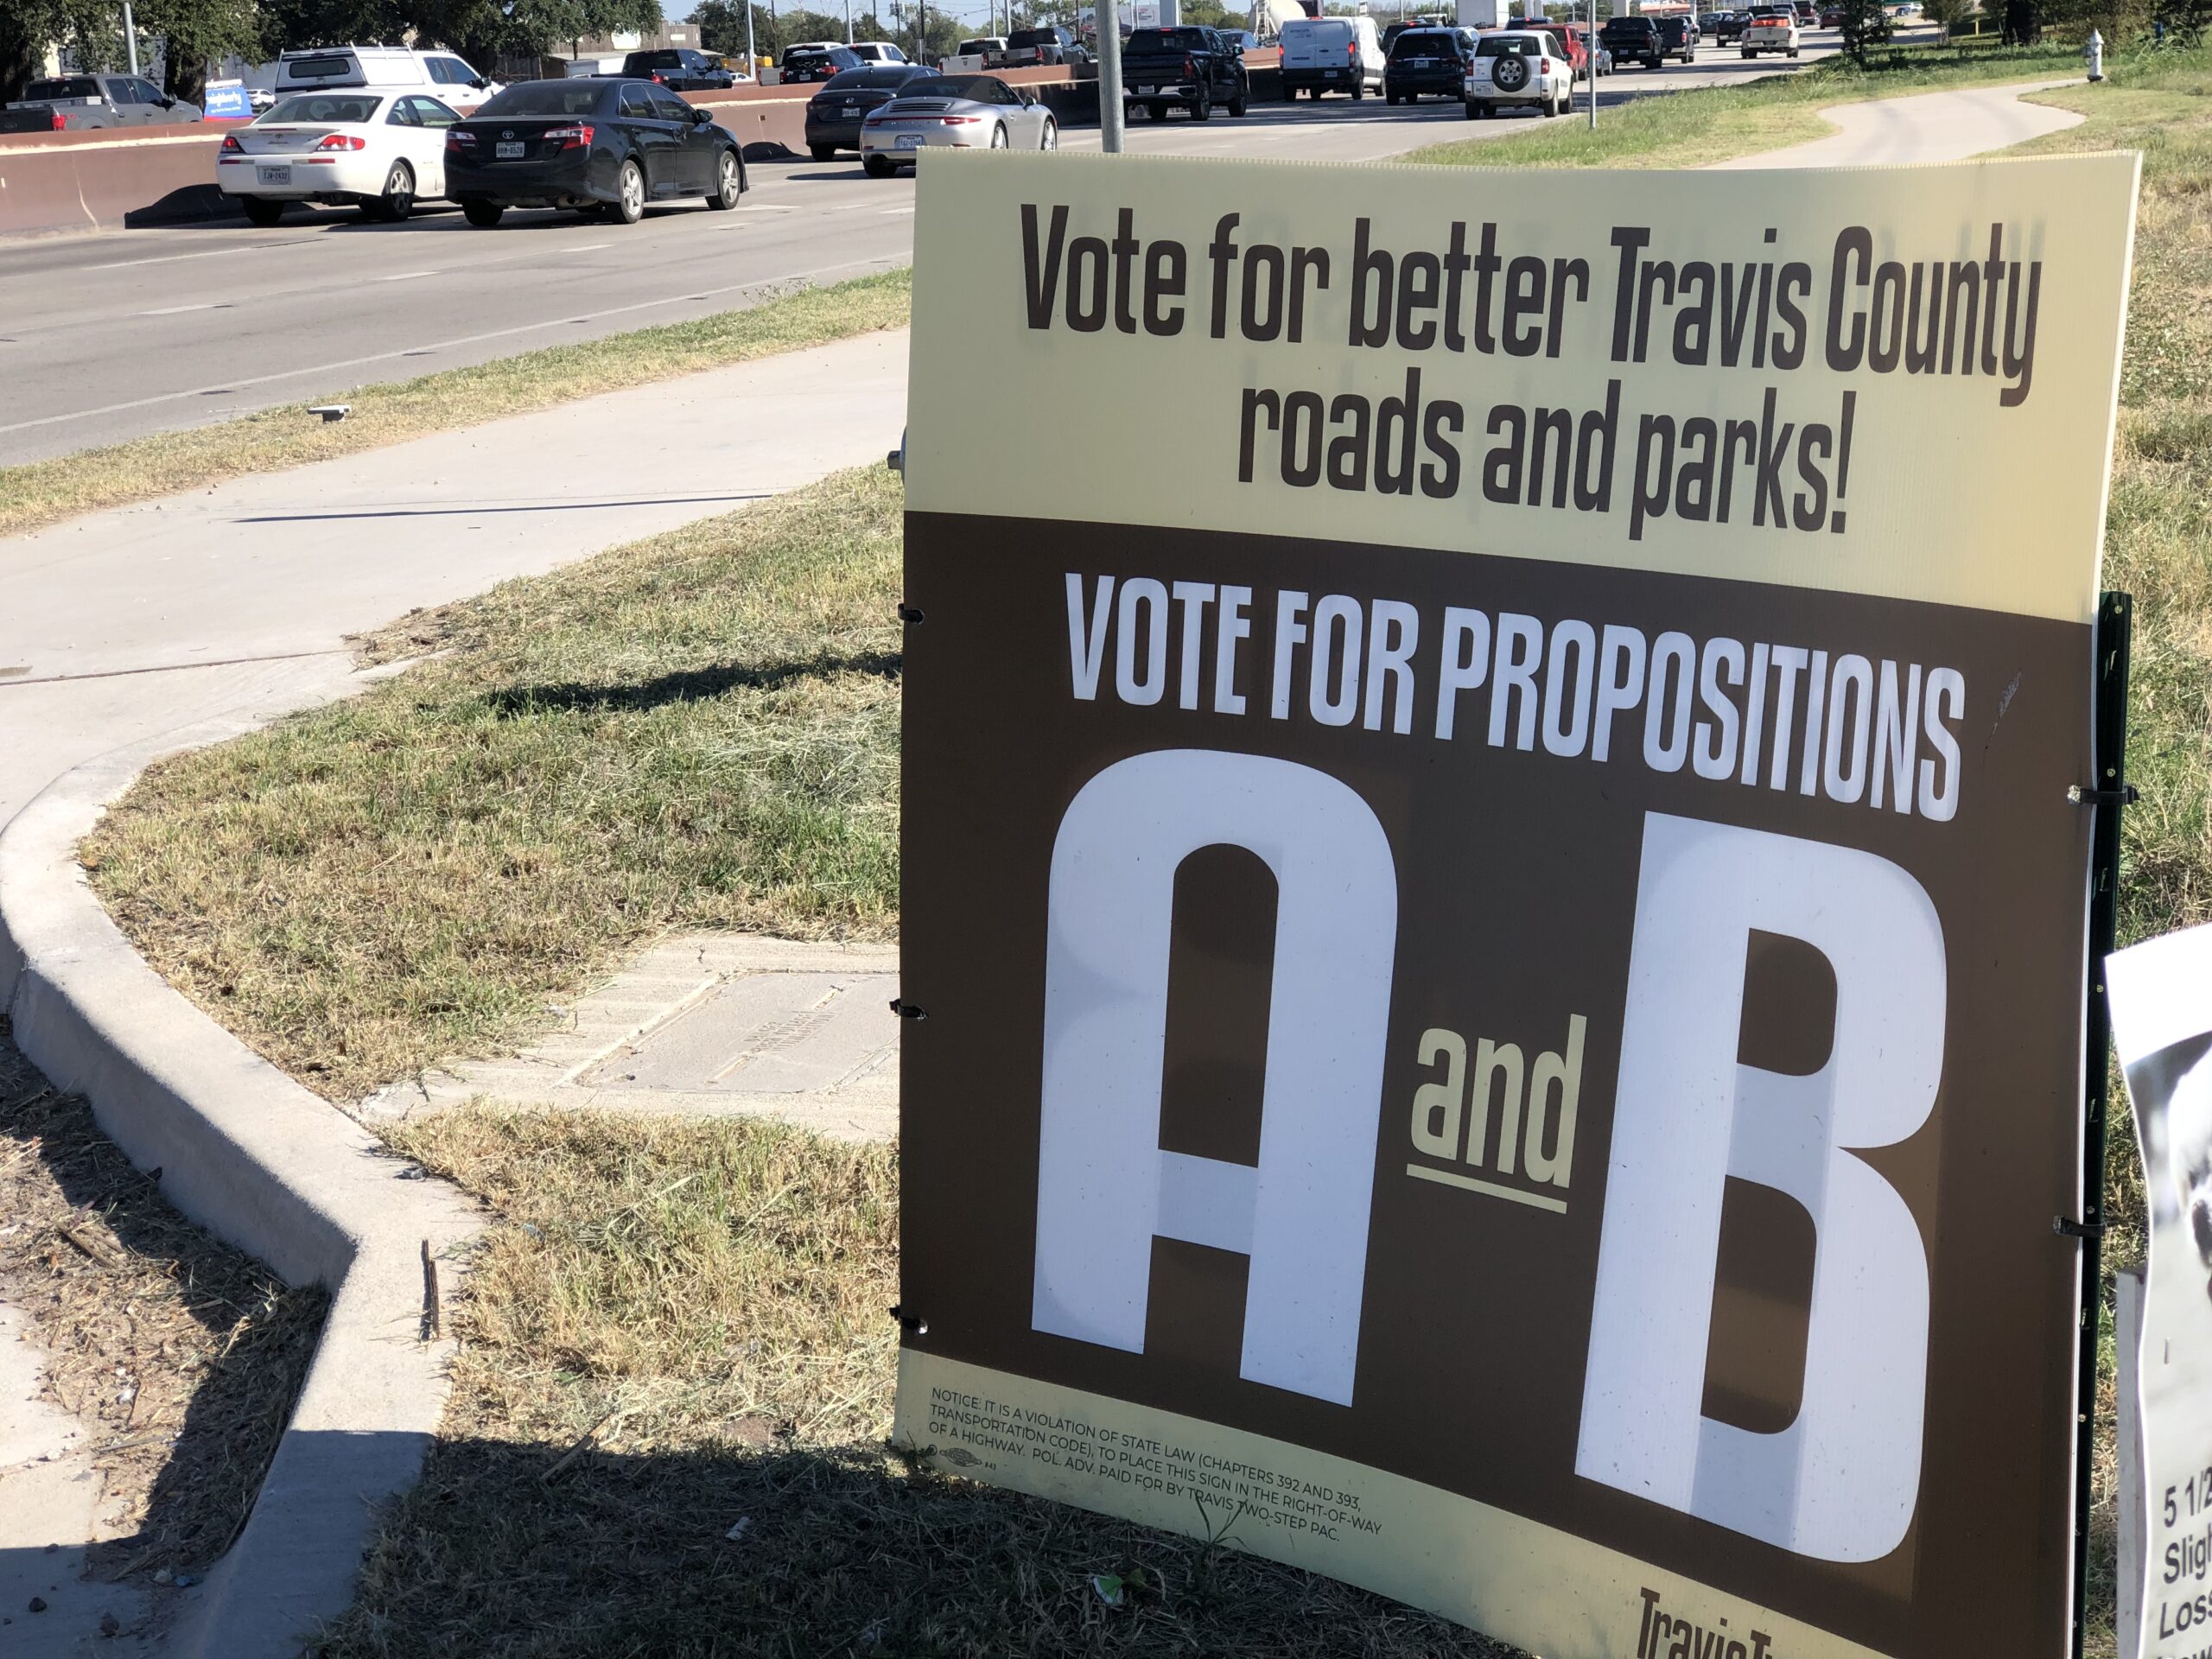 Travis County voters approve bond propositions aimed at roads, parks